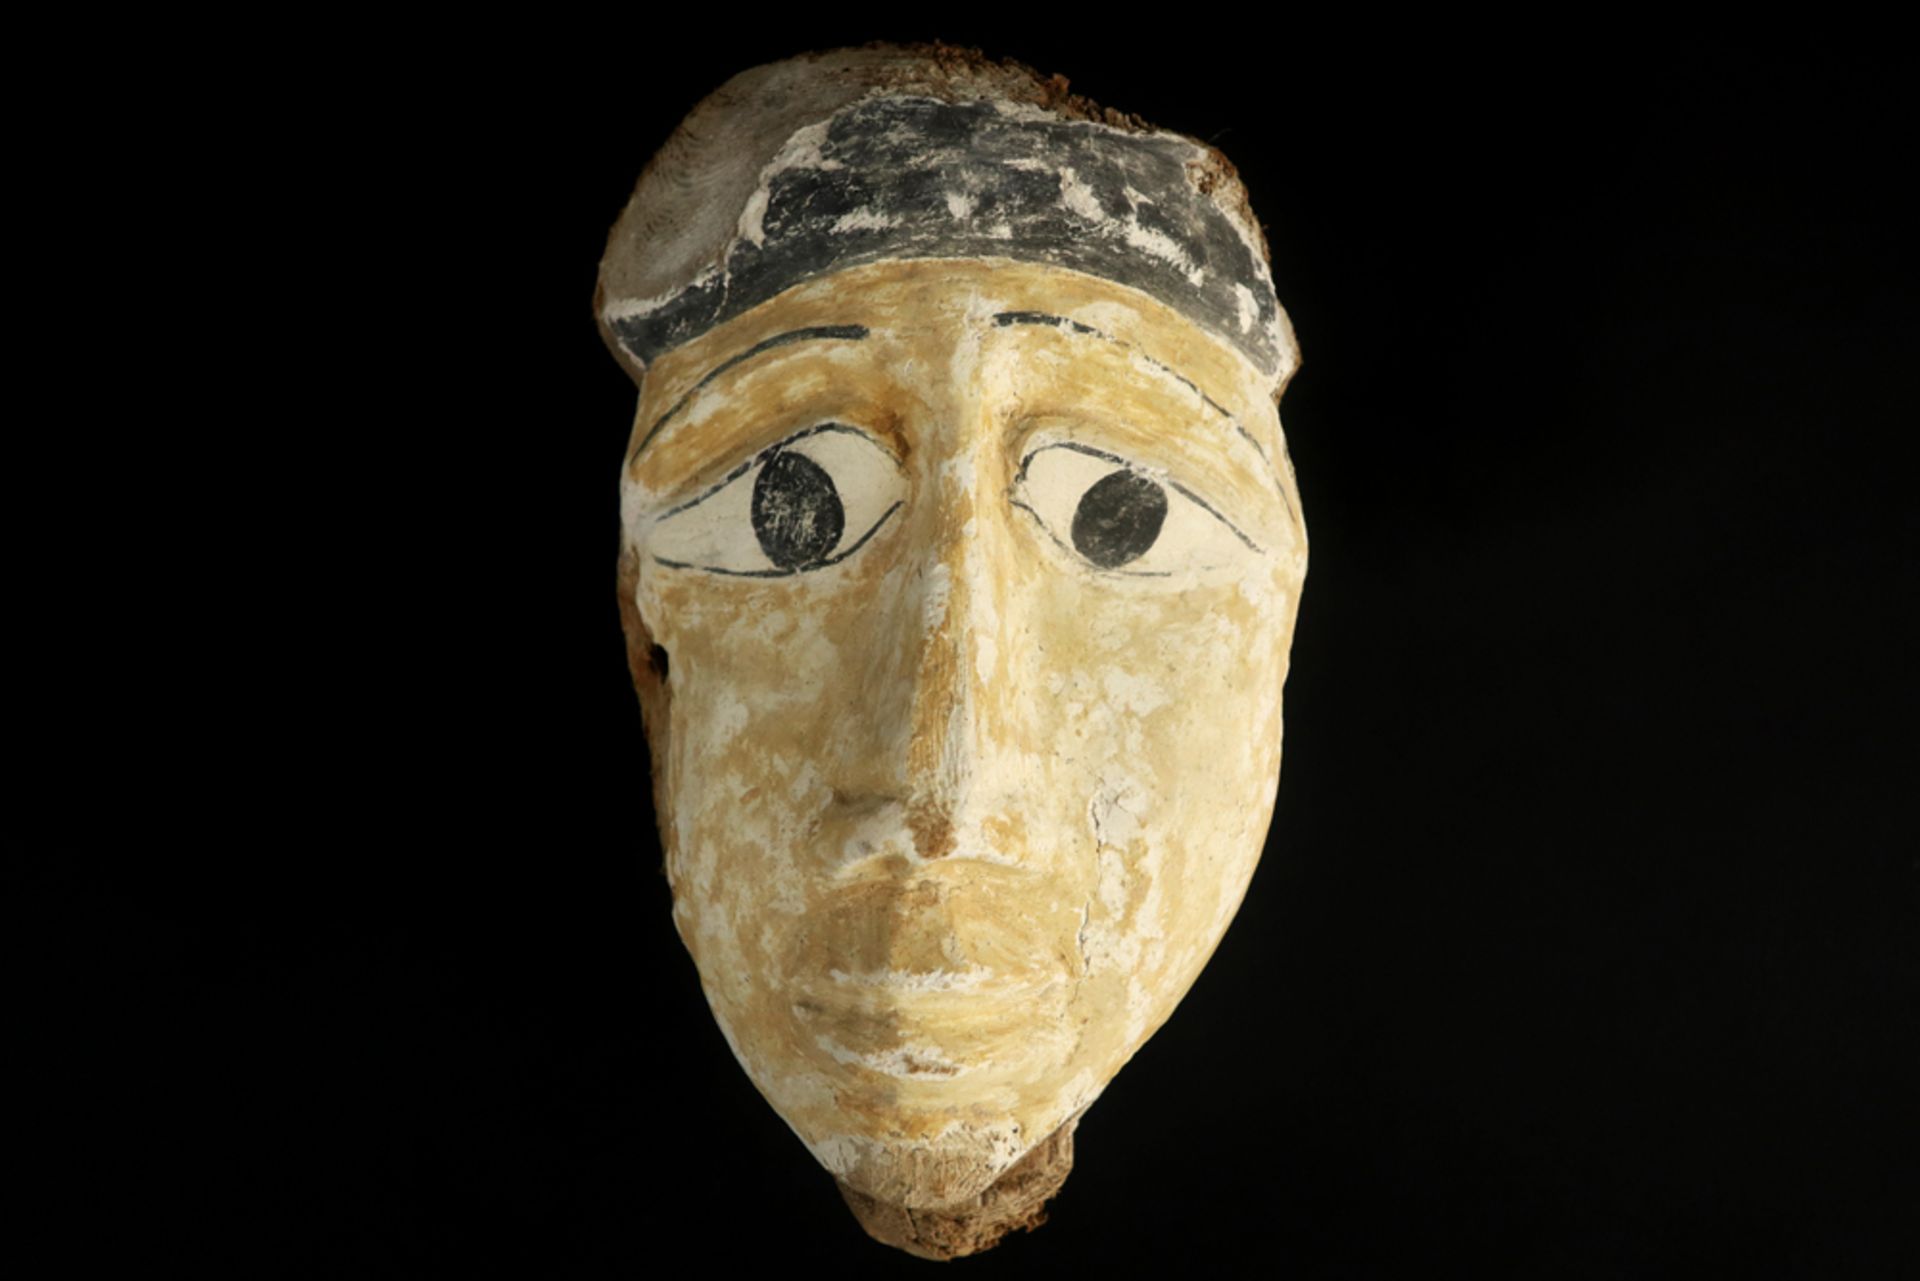 Ancient Egyptian 26th/30th Dynasty mask in wood with original polychromy || OUD-EGYPTE - LATE RIJK -